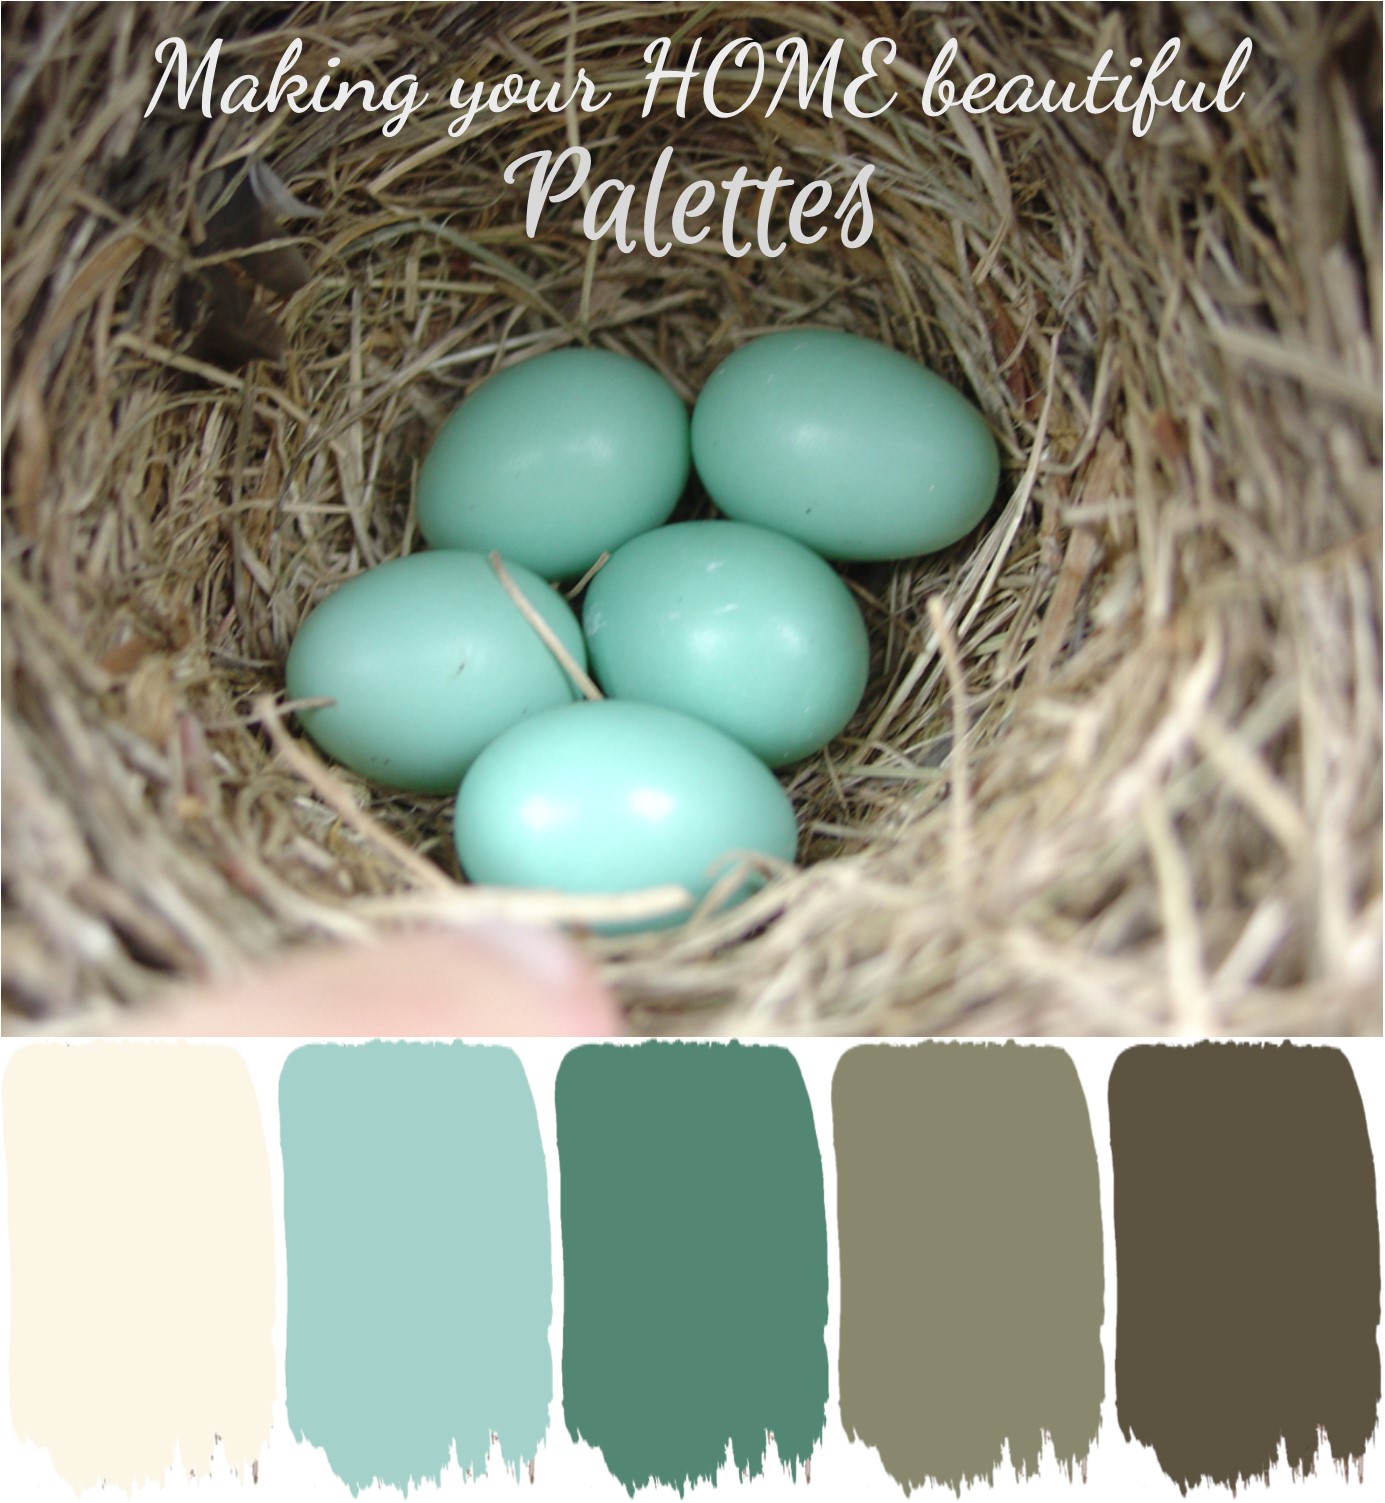 Let me show you how to use Duck Egg Blue